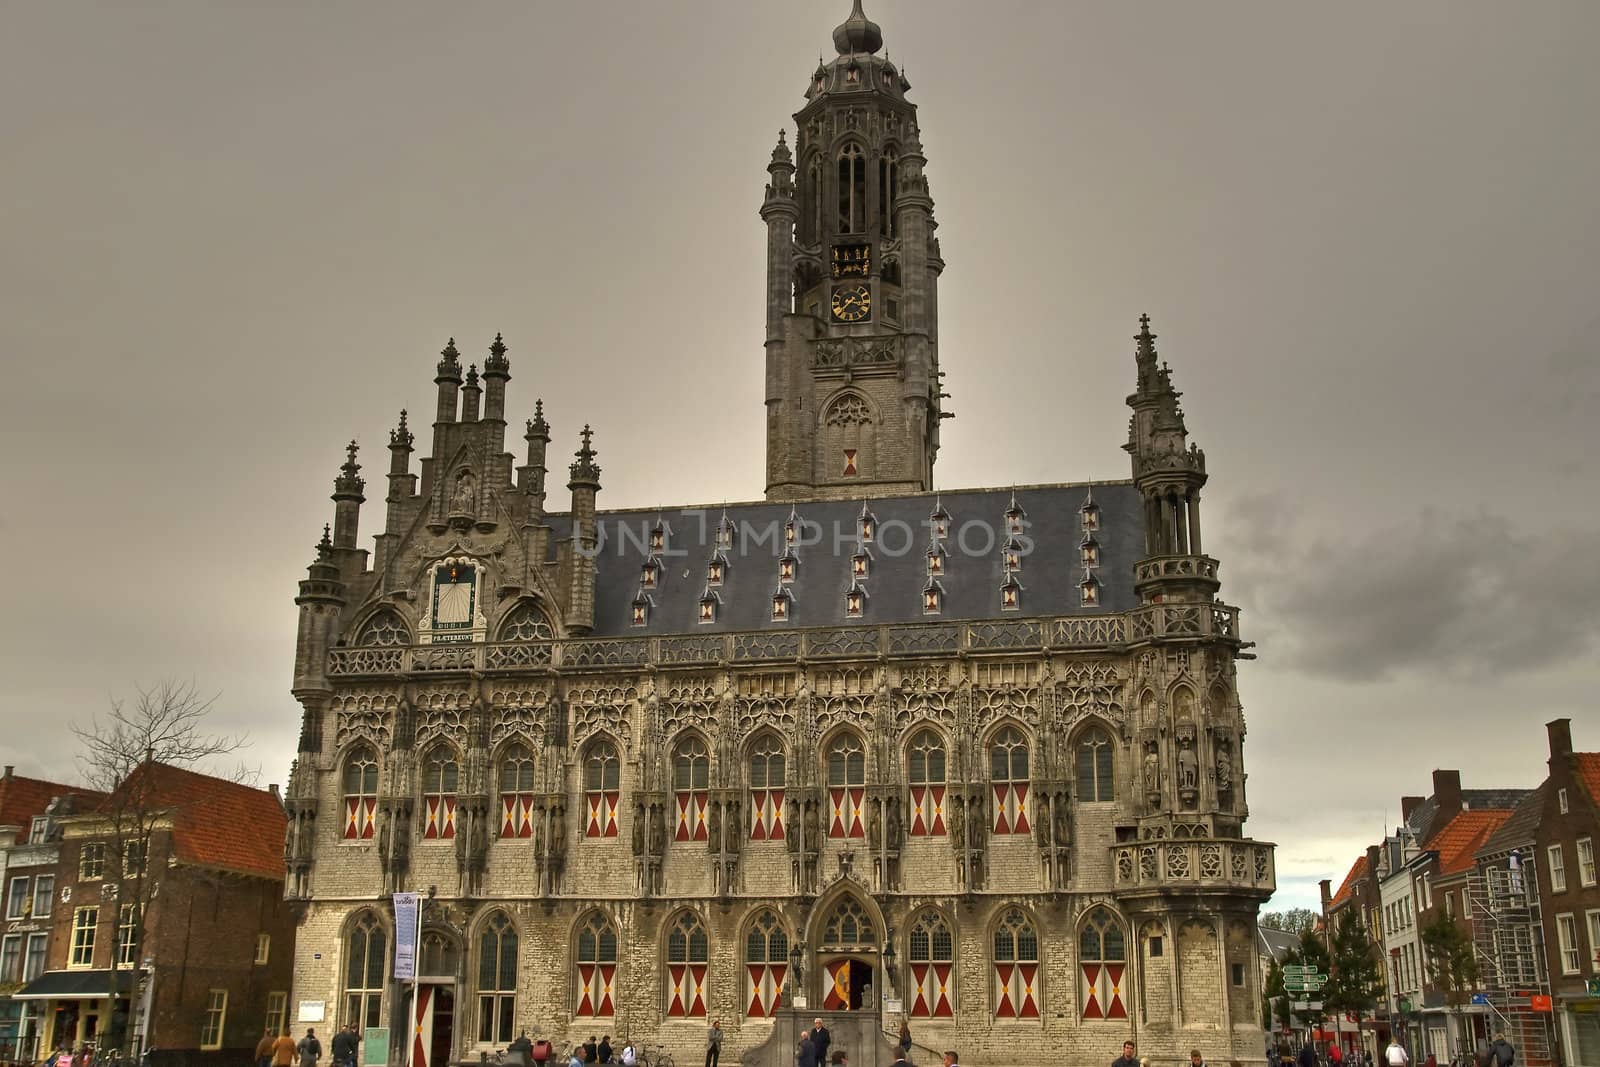 City hall of Middelburg in the Netherlands by Gertje